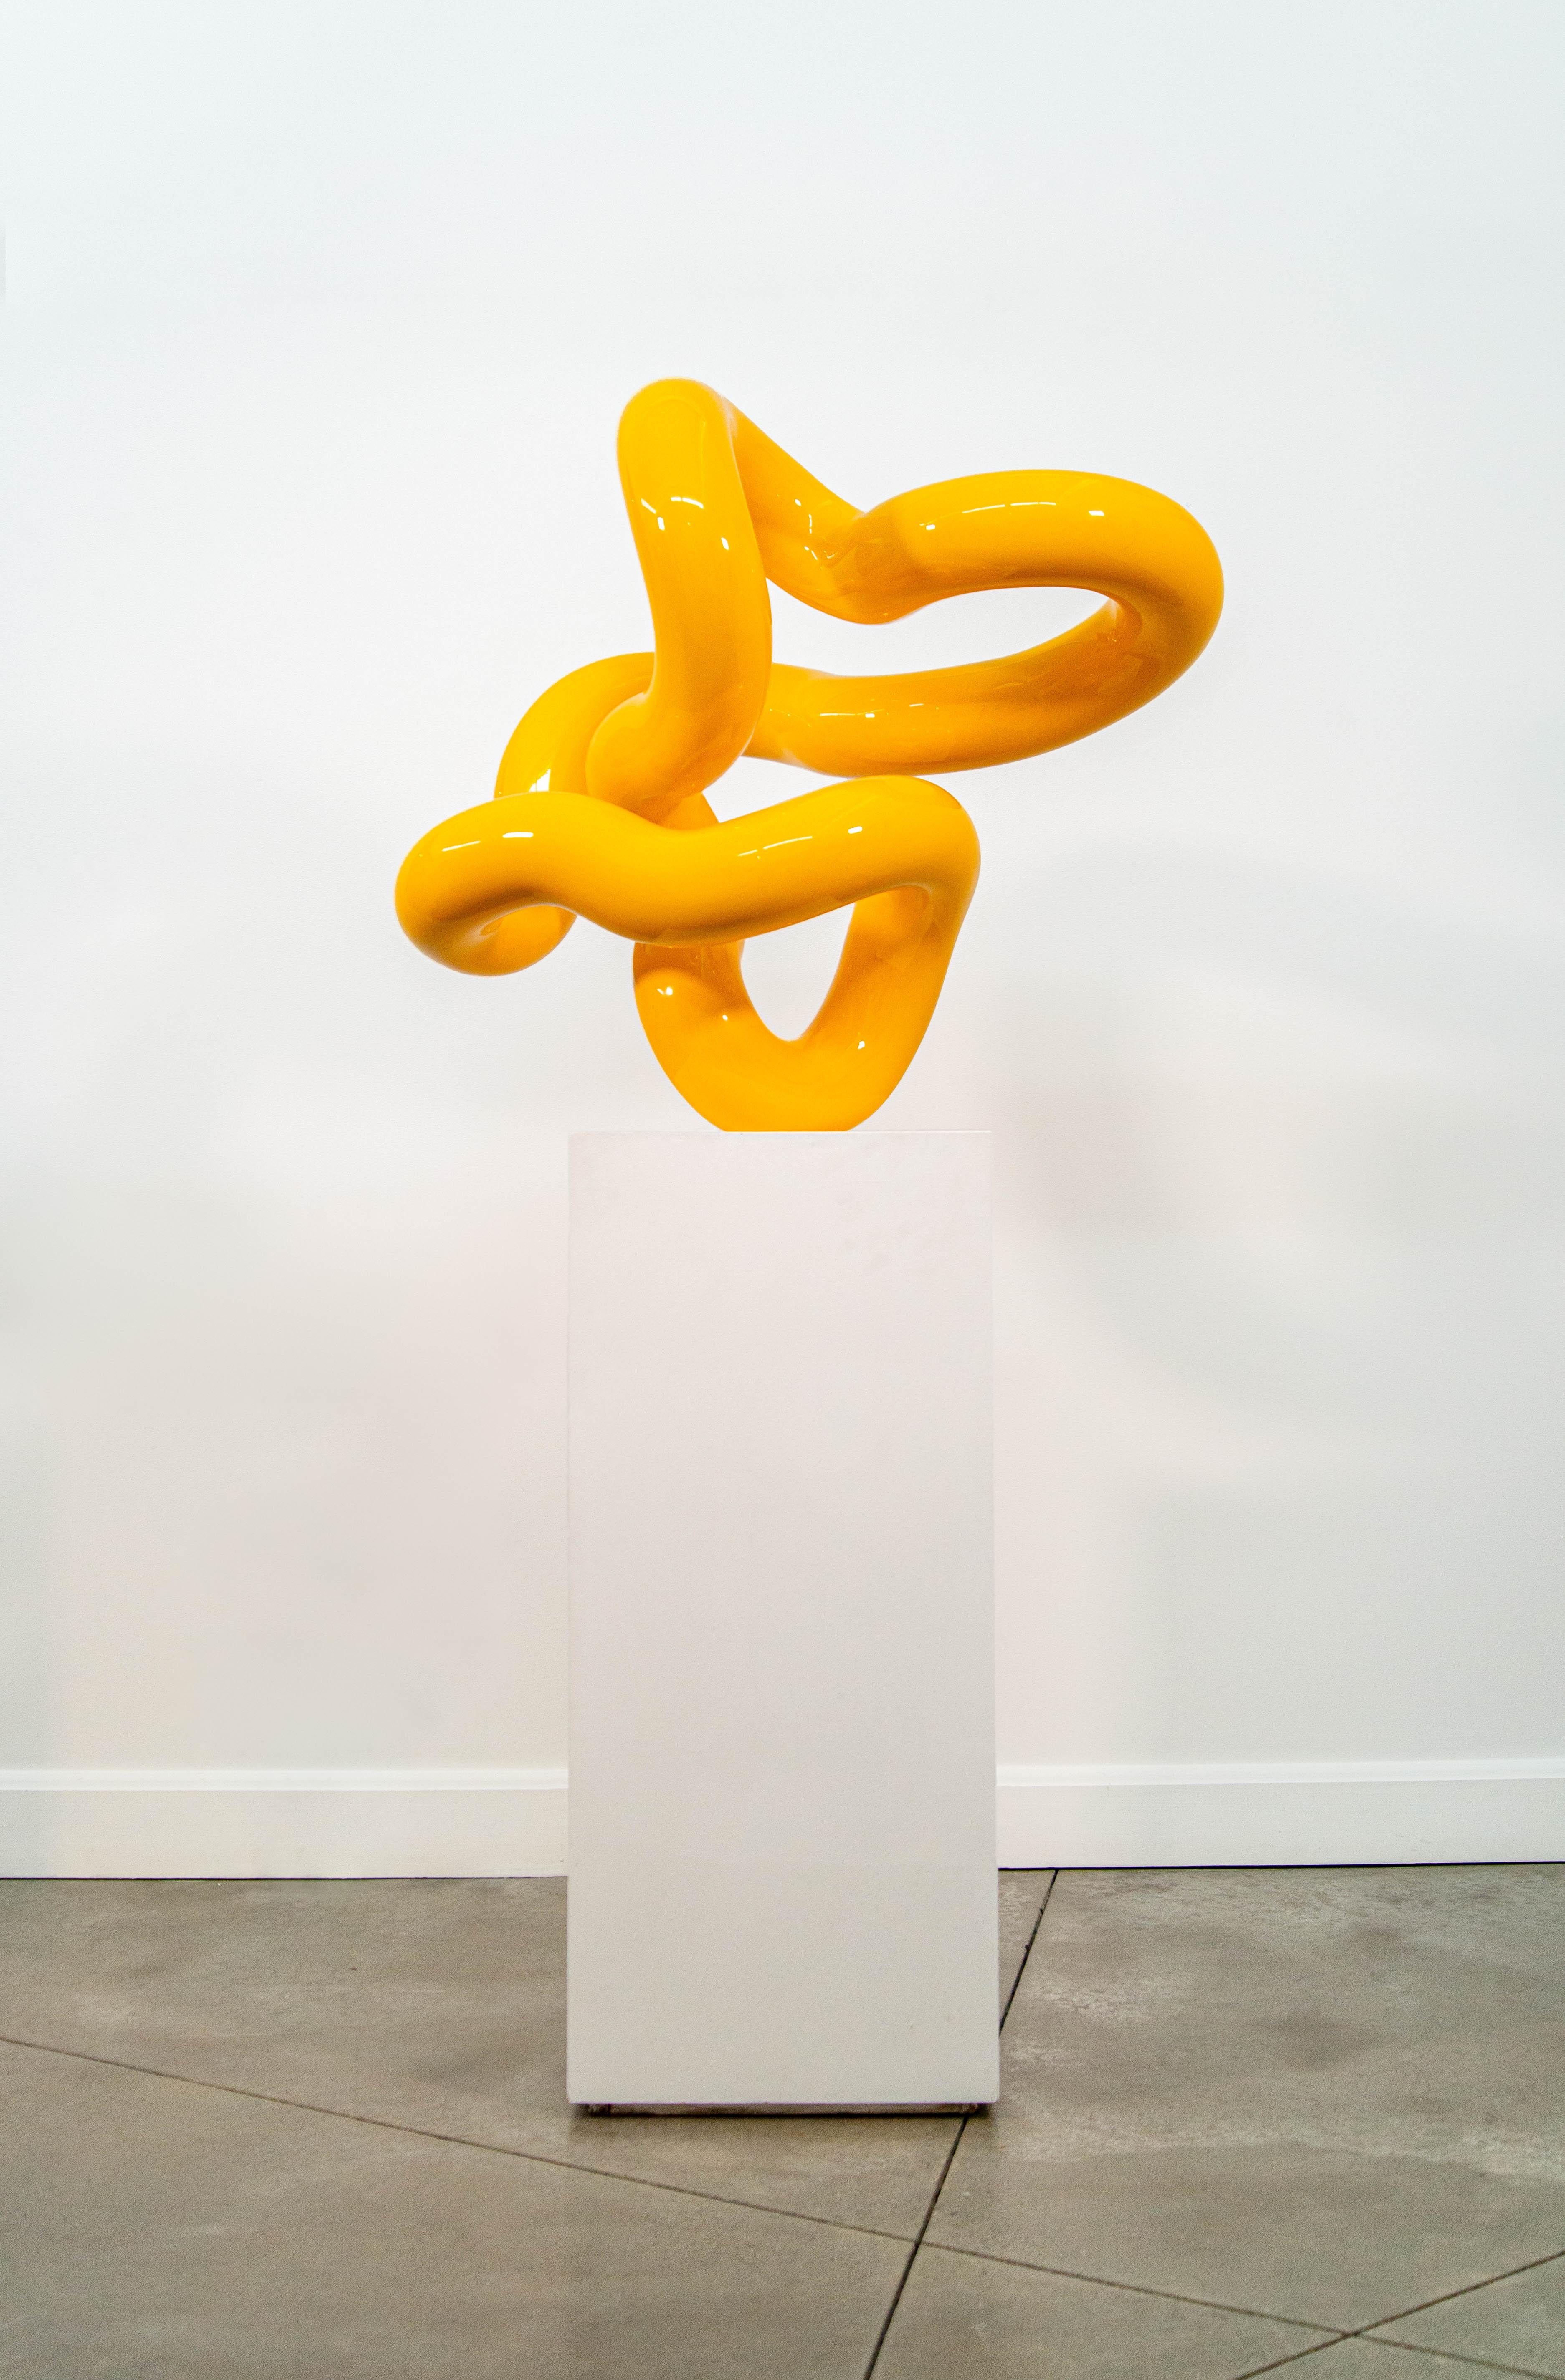 Yellow Circuit - polished, abstract, painted, stainless steel sculpture - Sculpture by Alexander Caldwell